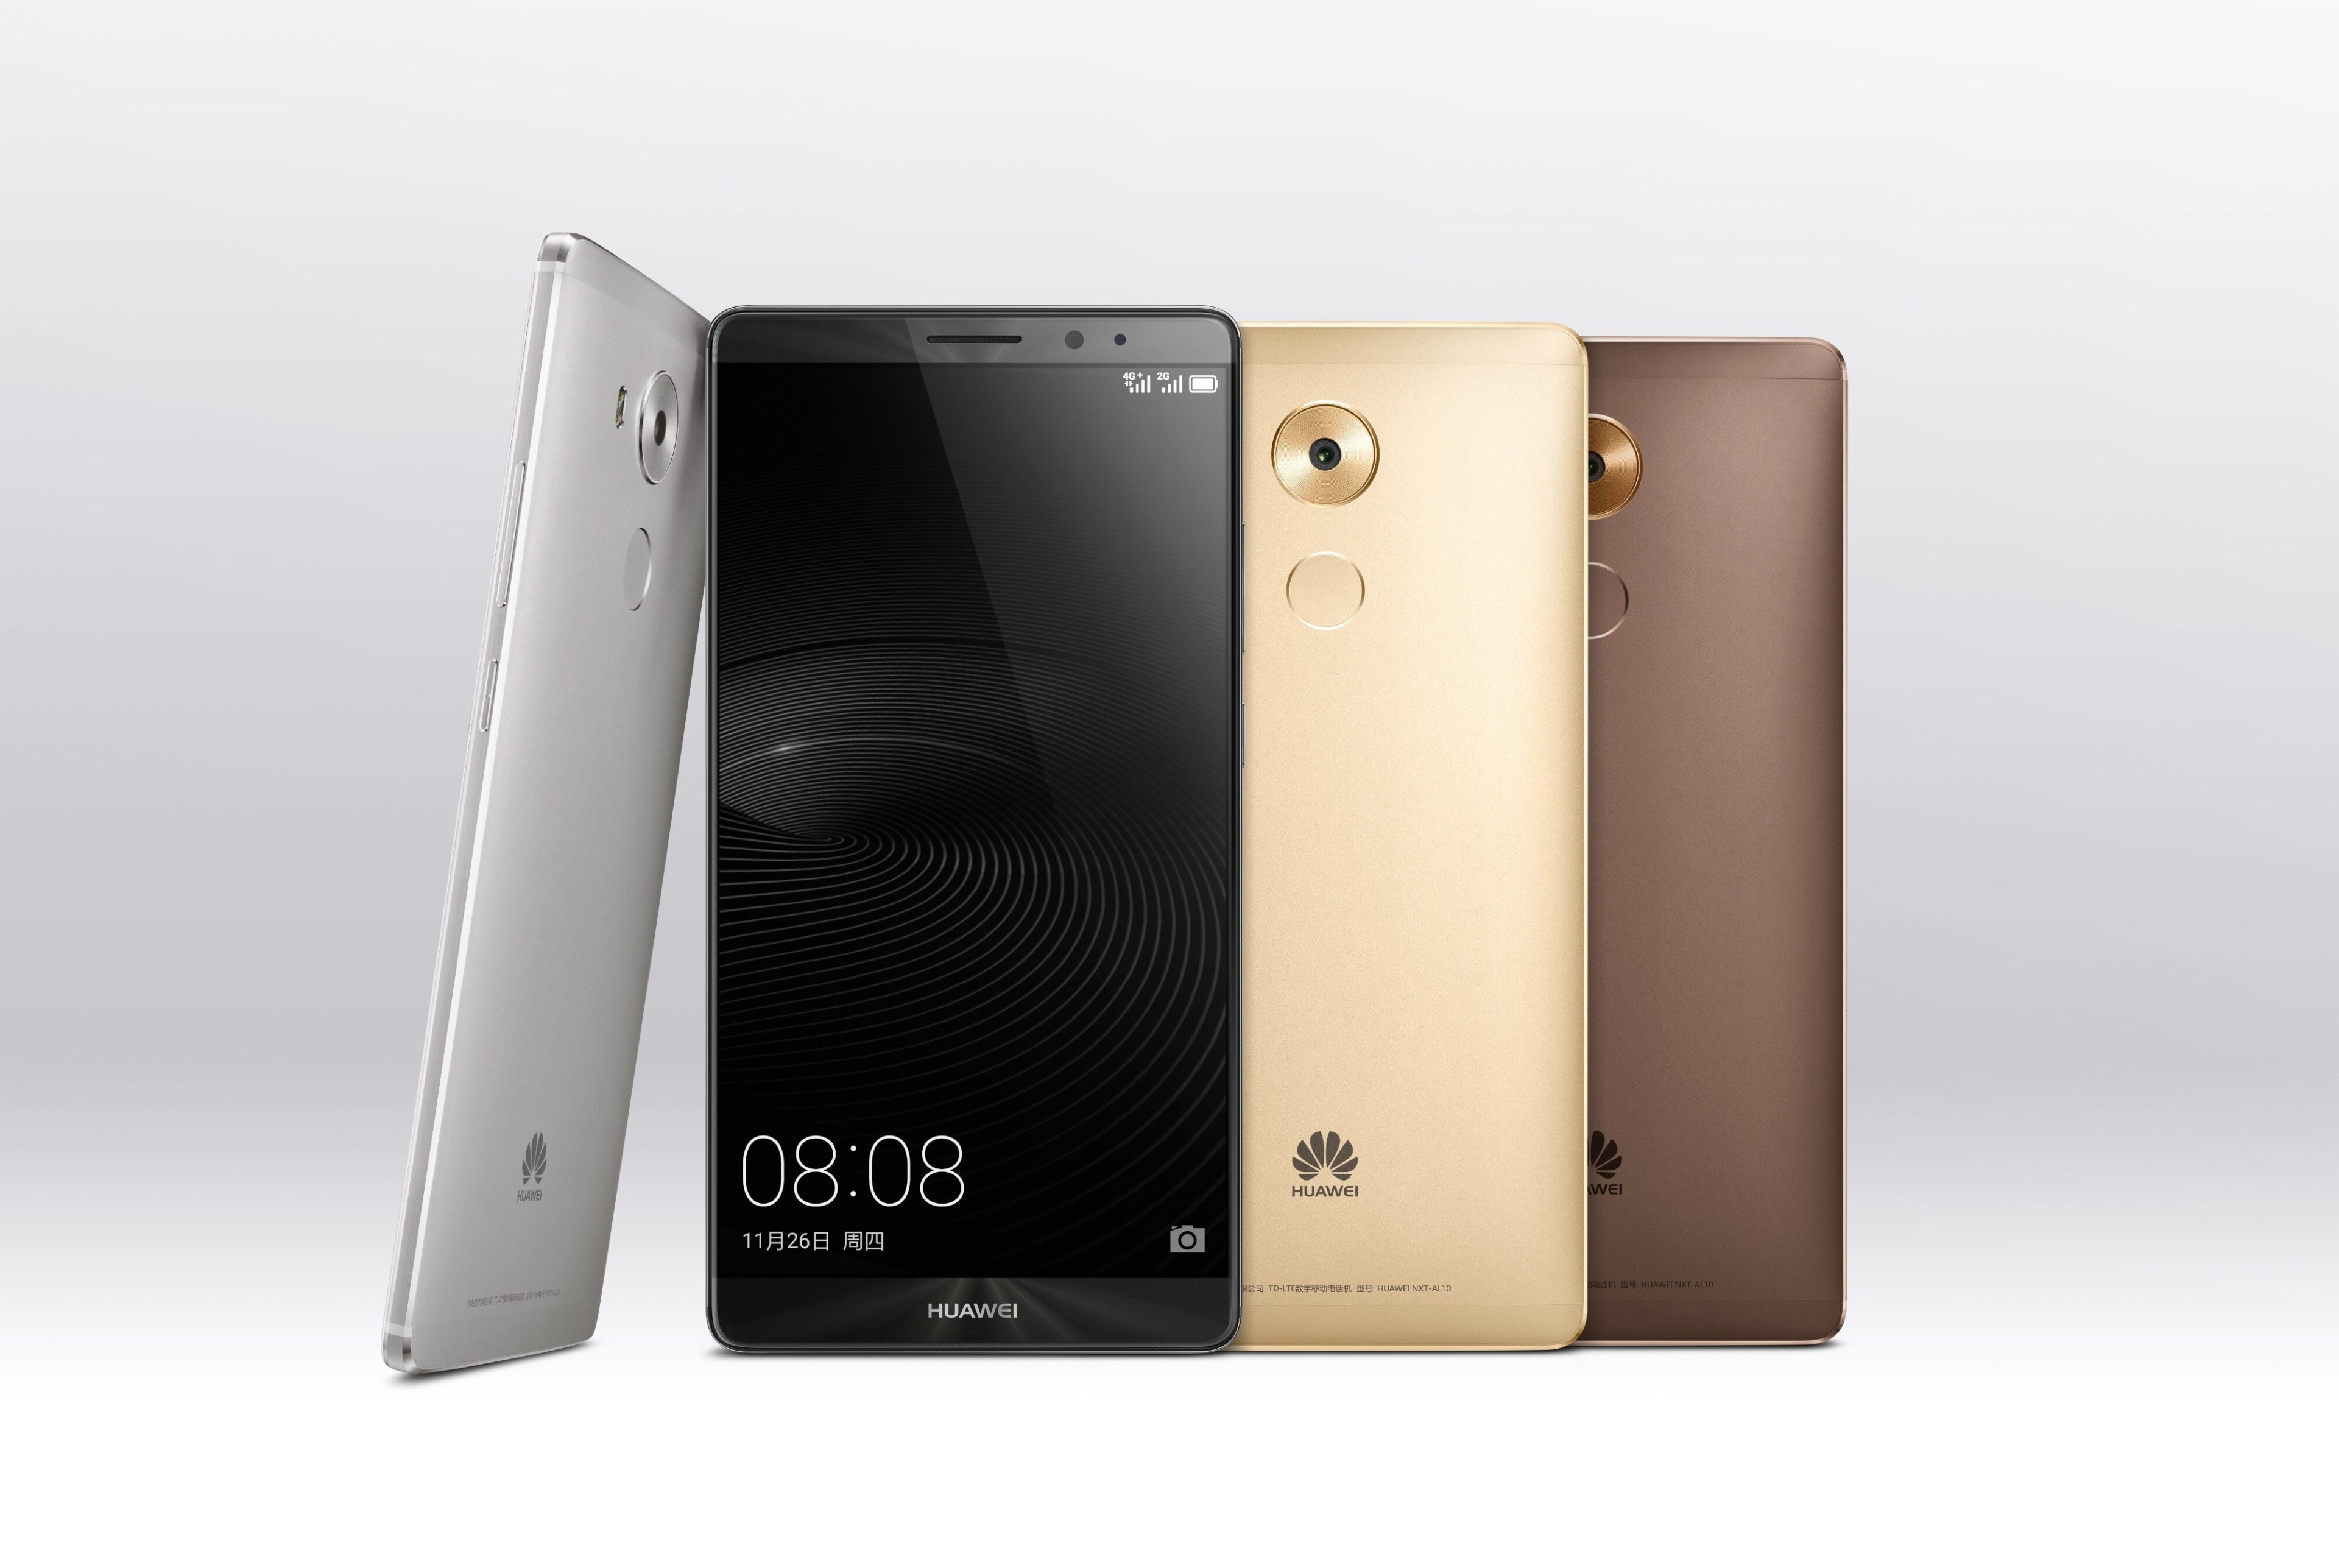 huawei mate 8 wallpaper,mobile phone,gadget,smartphone,communication device,portable communications device